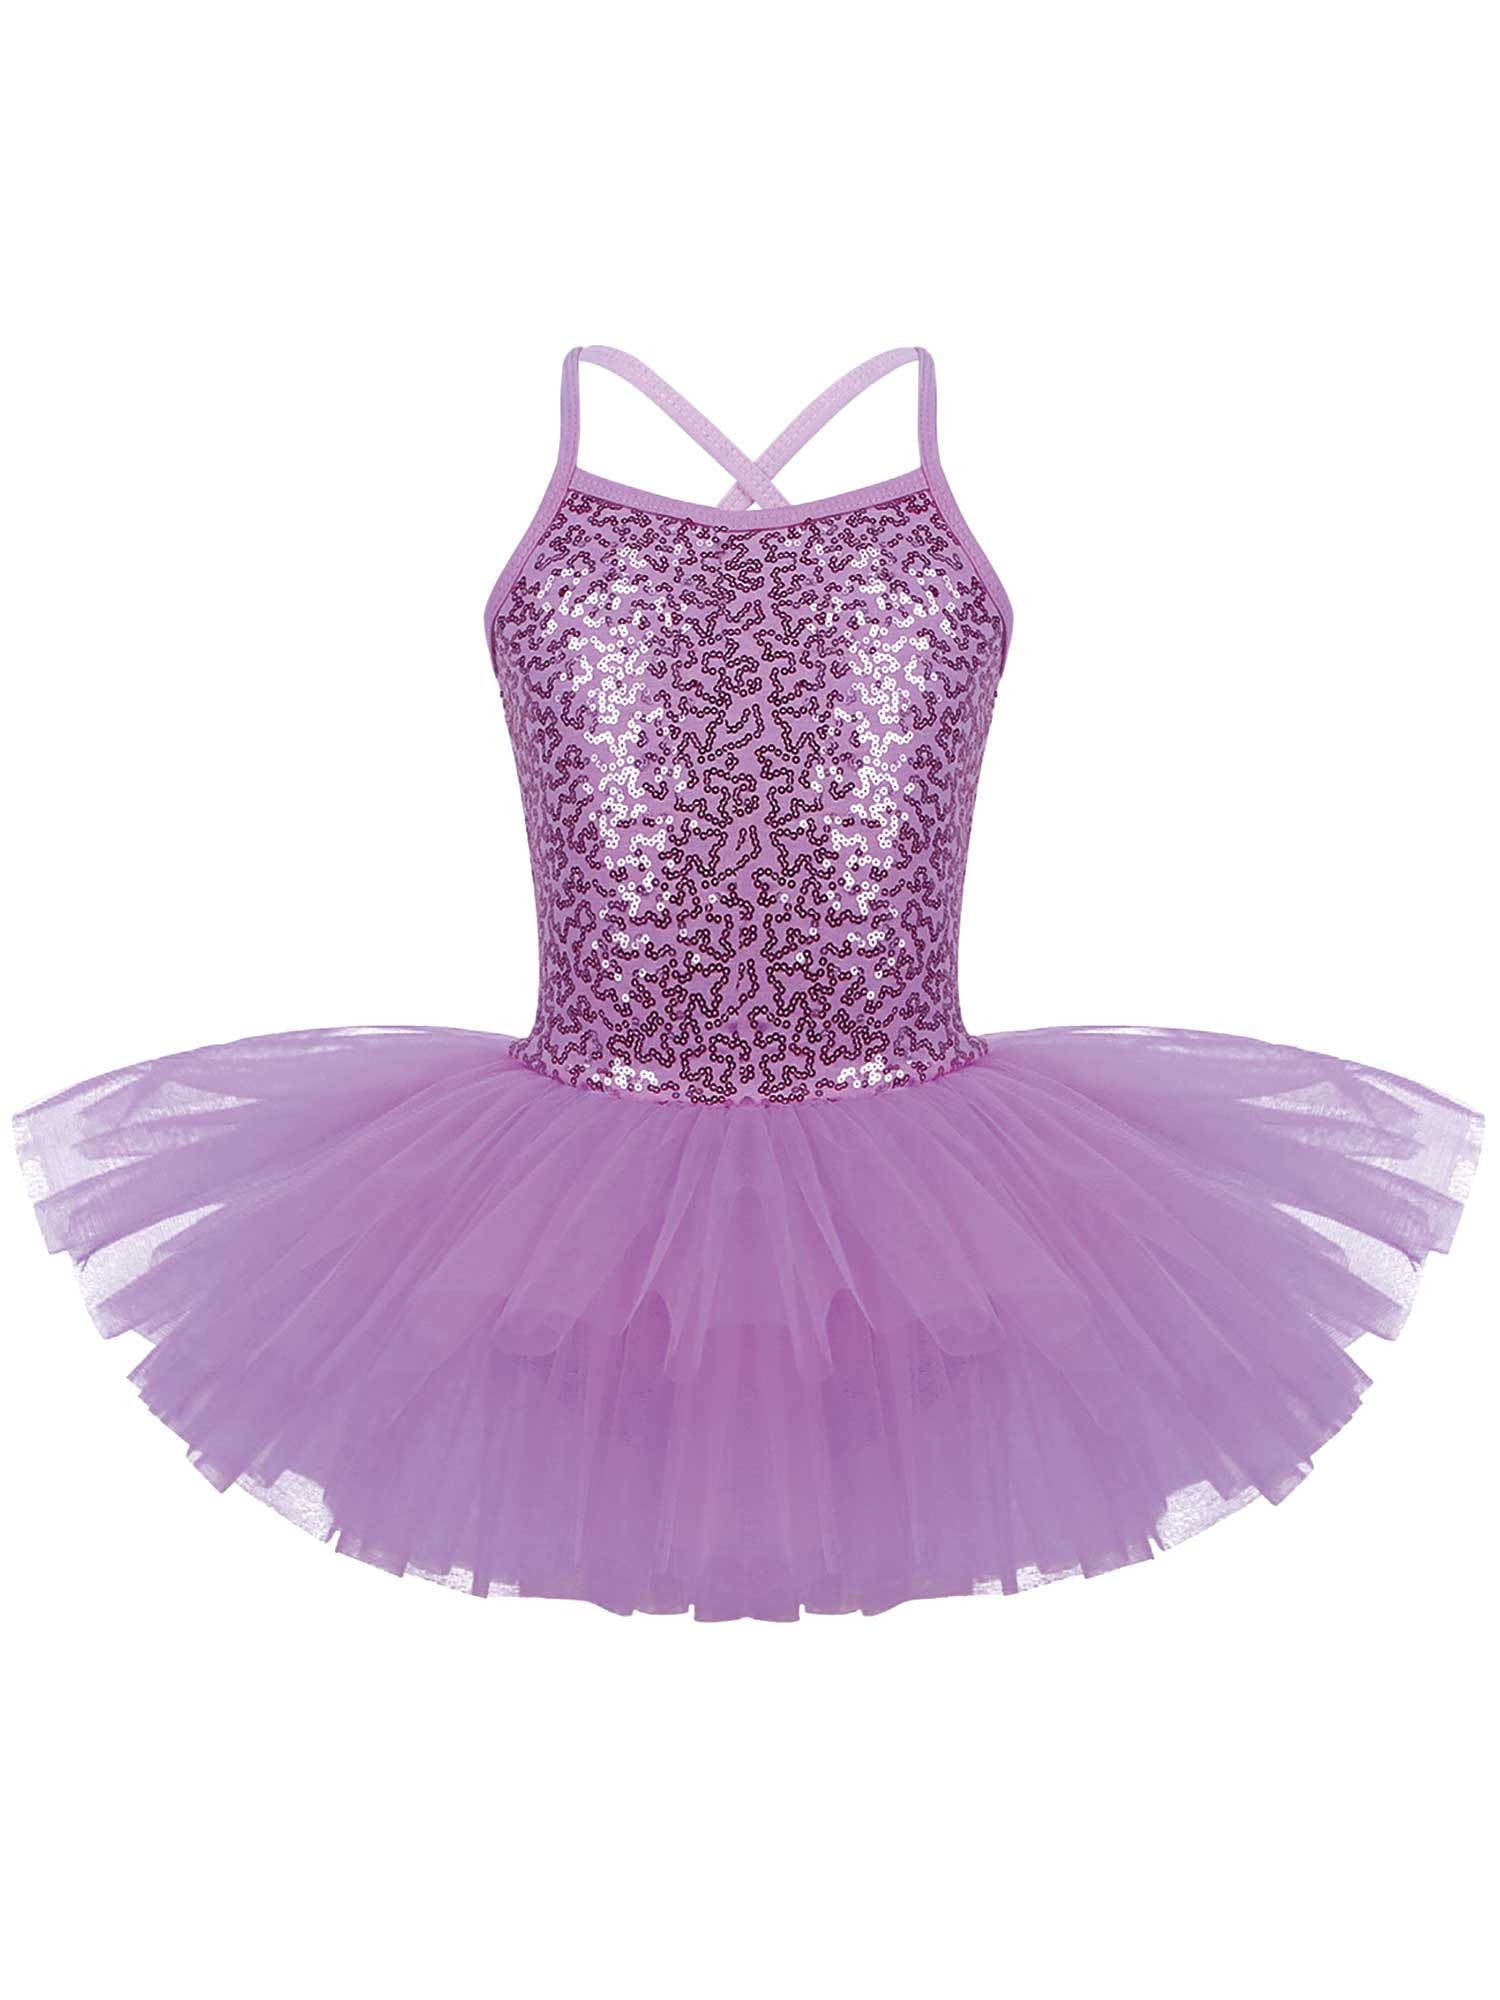 Details about   Brand New Justice Girl Sequin Tutu Dress Size 12 